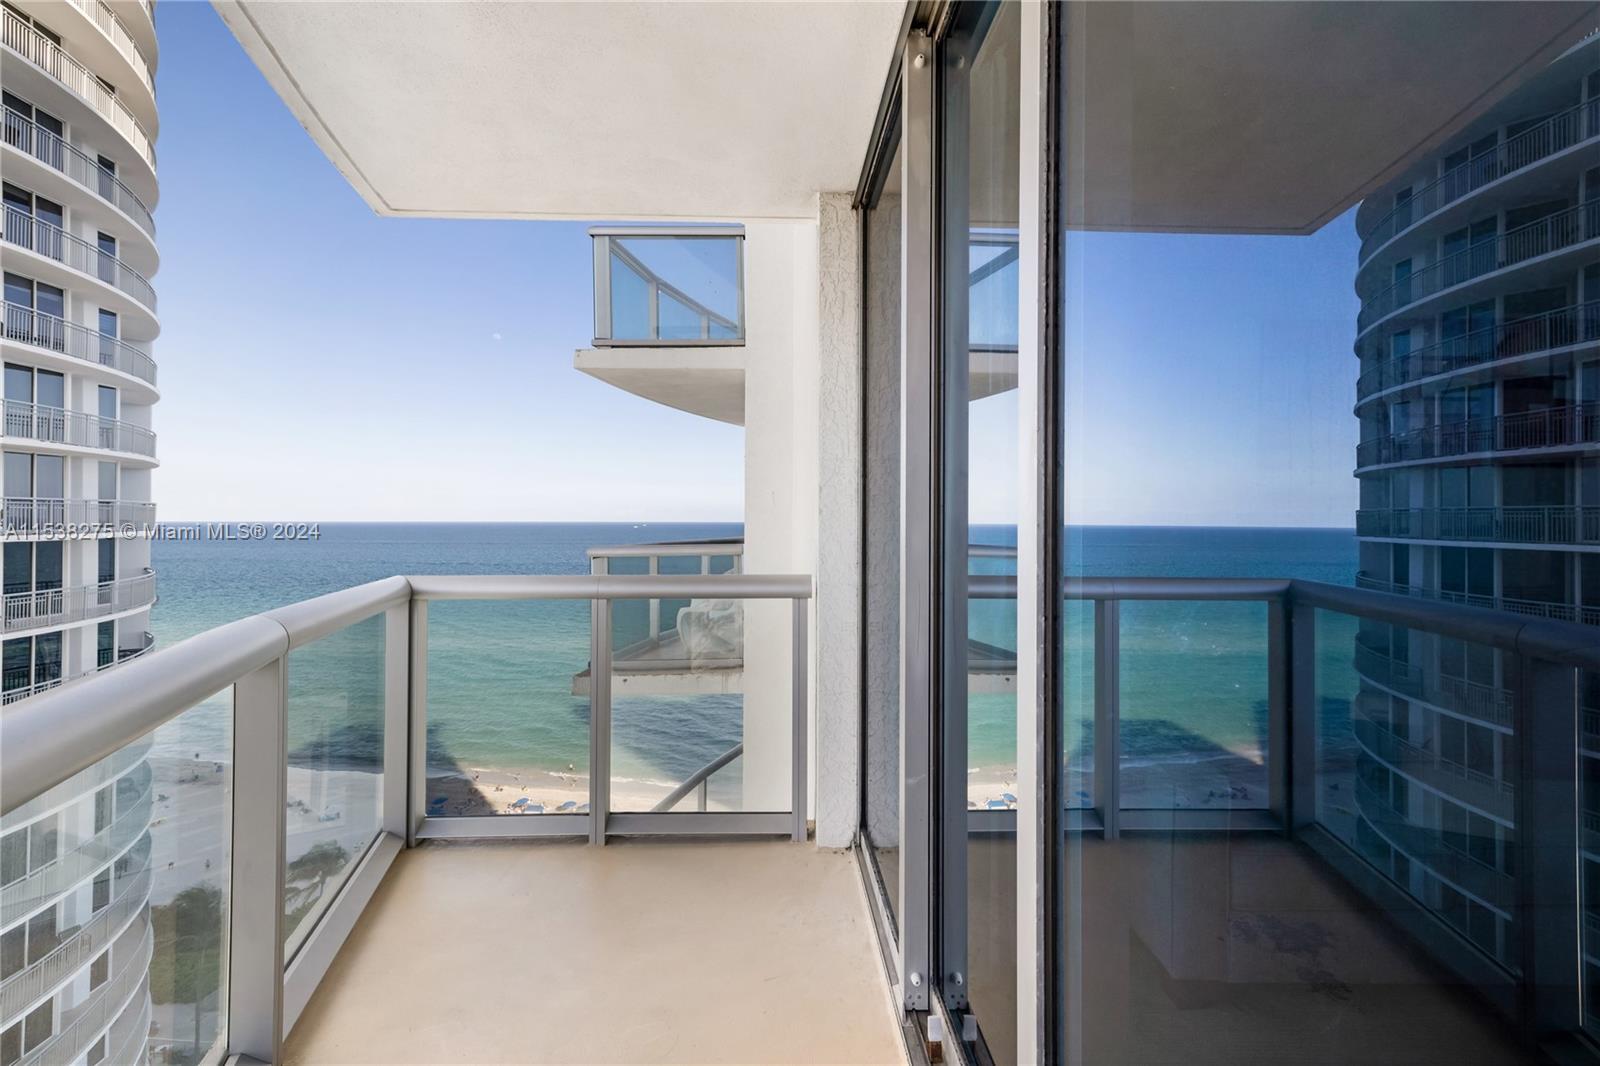 Spectacular condo-hotel located in the heart of Sunny Isles. This ocean front property has 1 bedroom